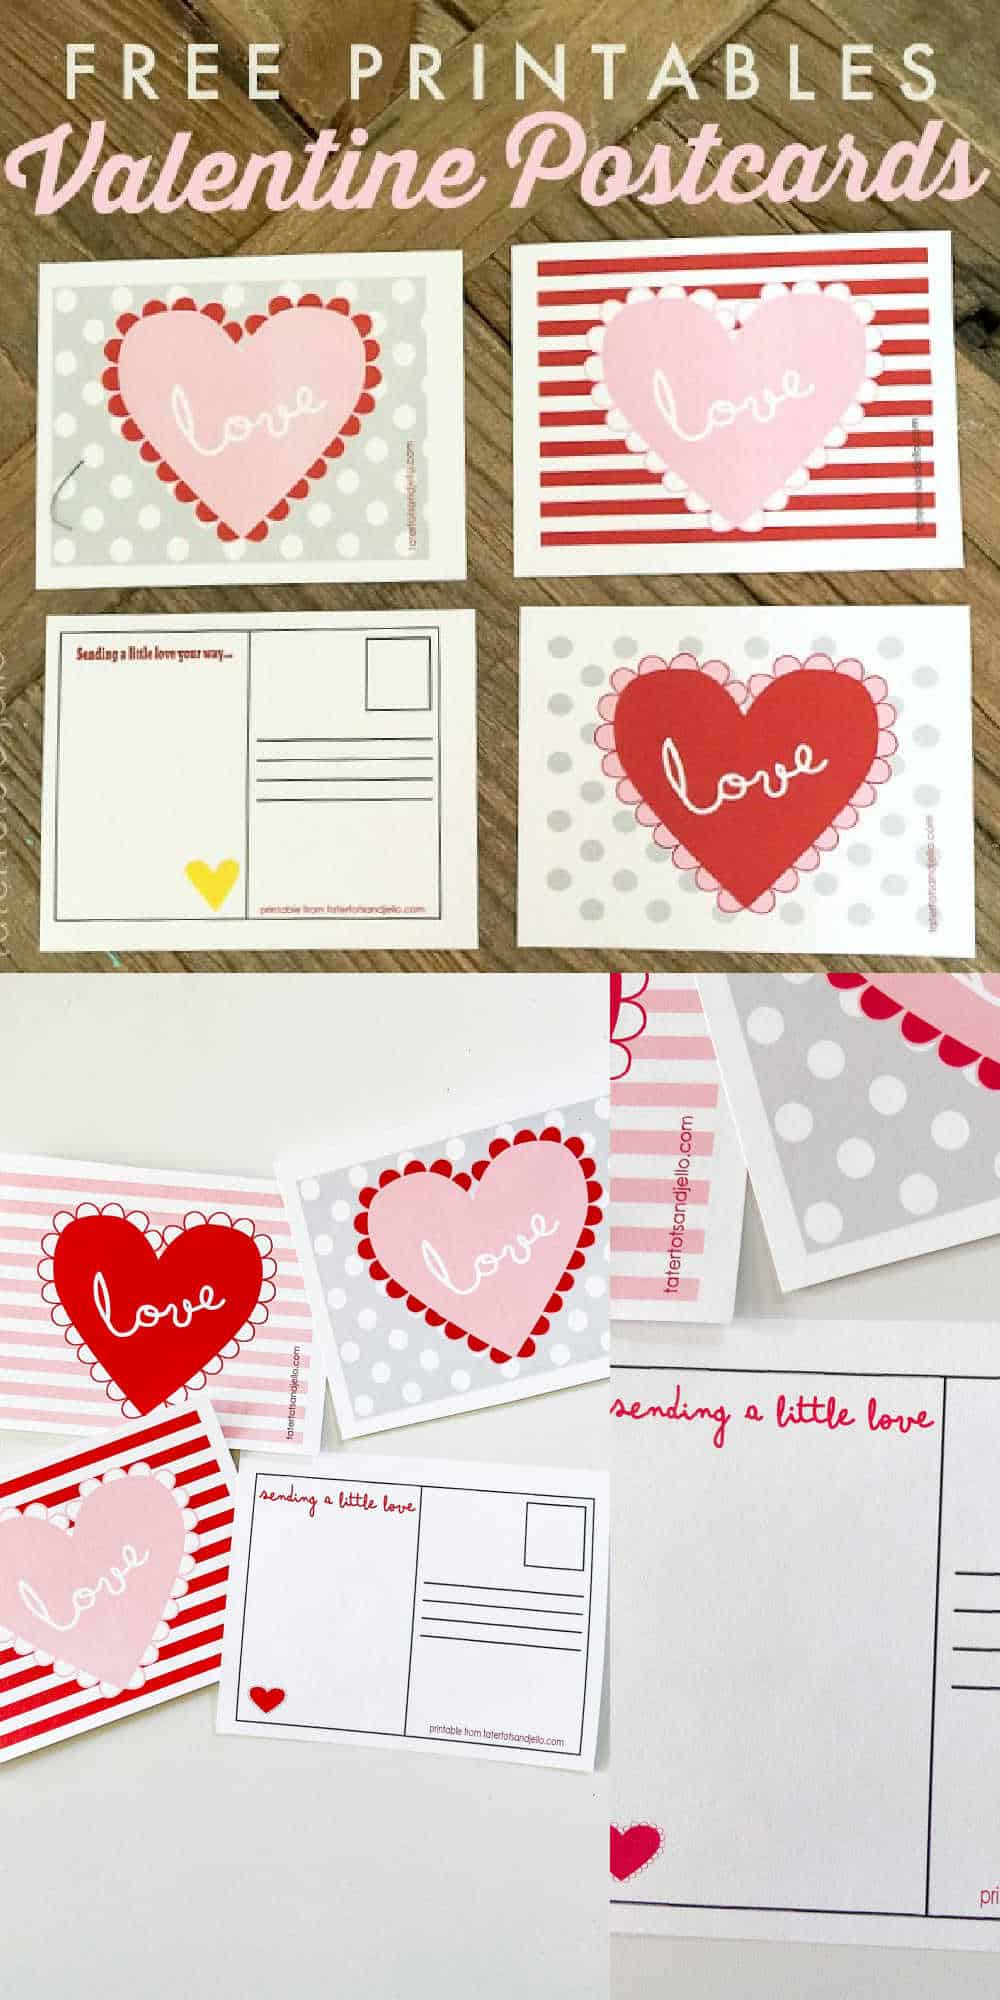 Adorable Valentine Postcards – Free Printables! Brighten up someone’s day with a sweet postcard sharing why they are important to you!